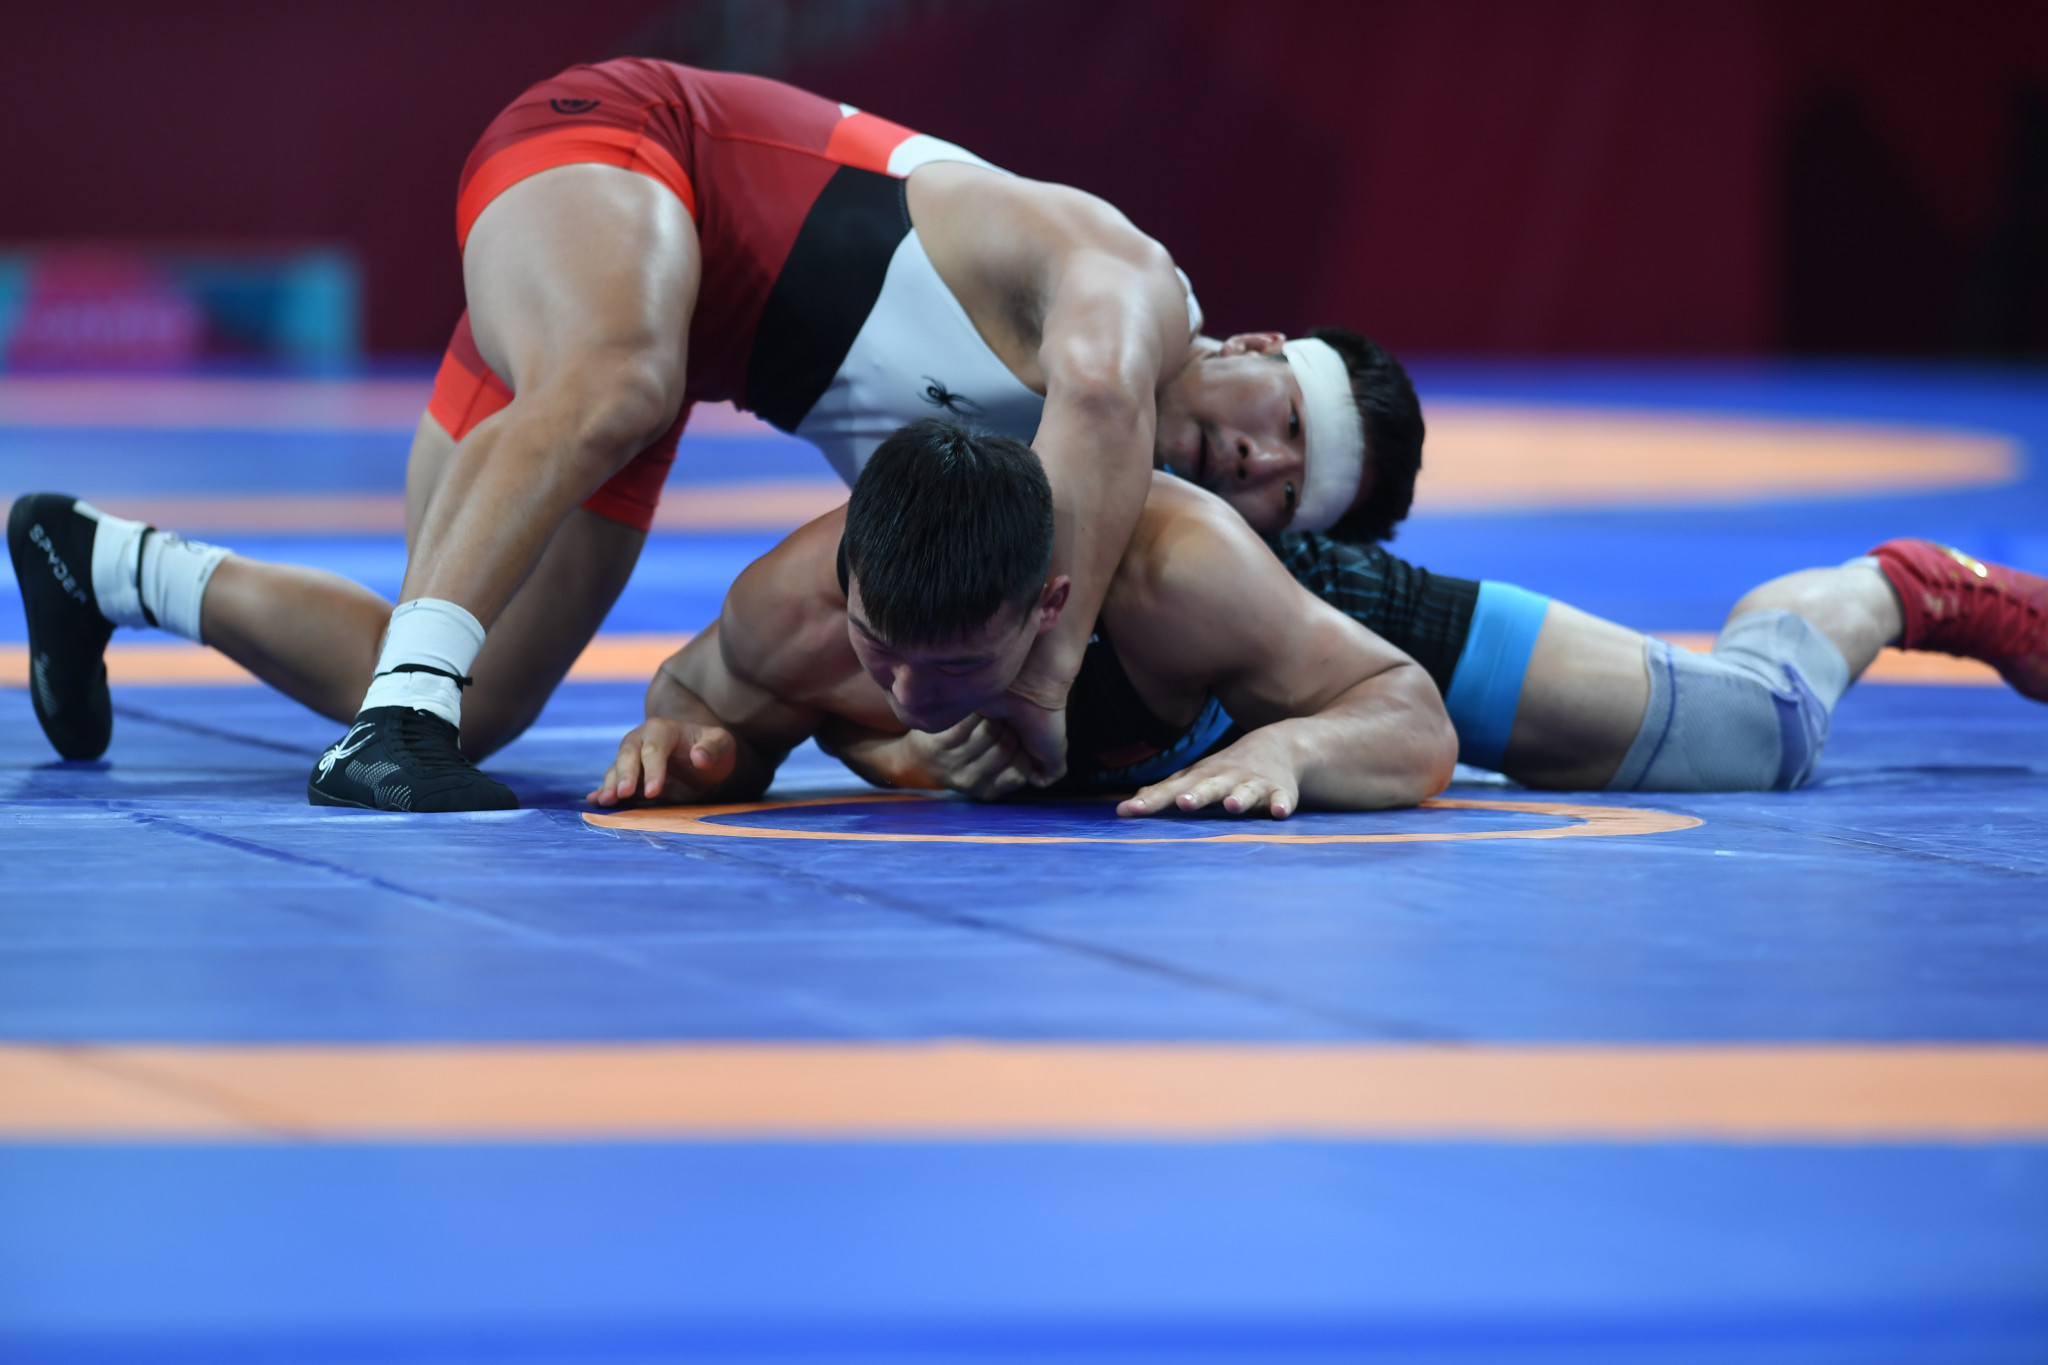 Officials from North and South Korea have reportedly met to discuss forming a joint wrestling team for the Tokyo 2020 Olympic Games ©Getty Images